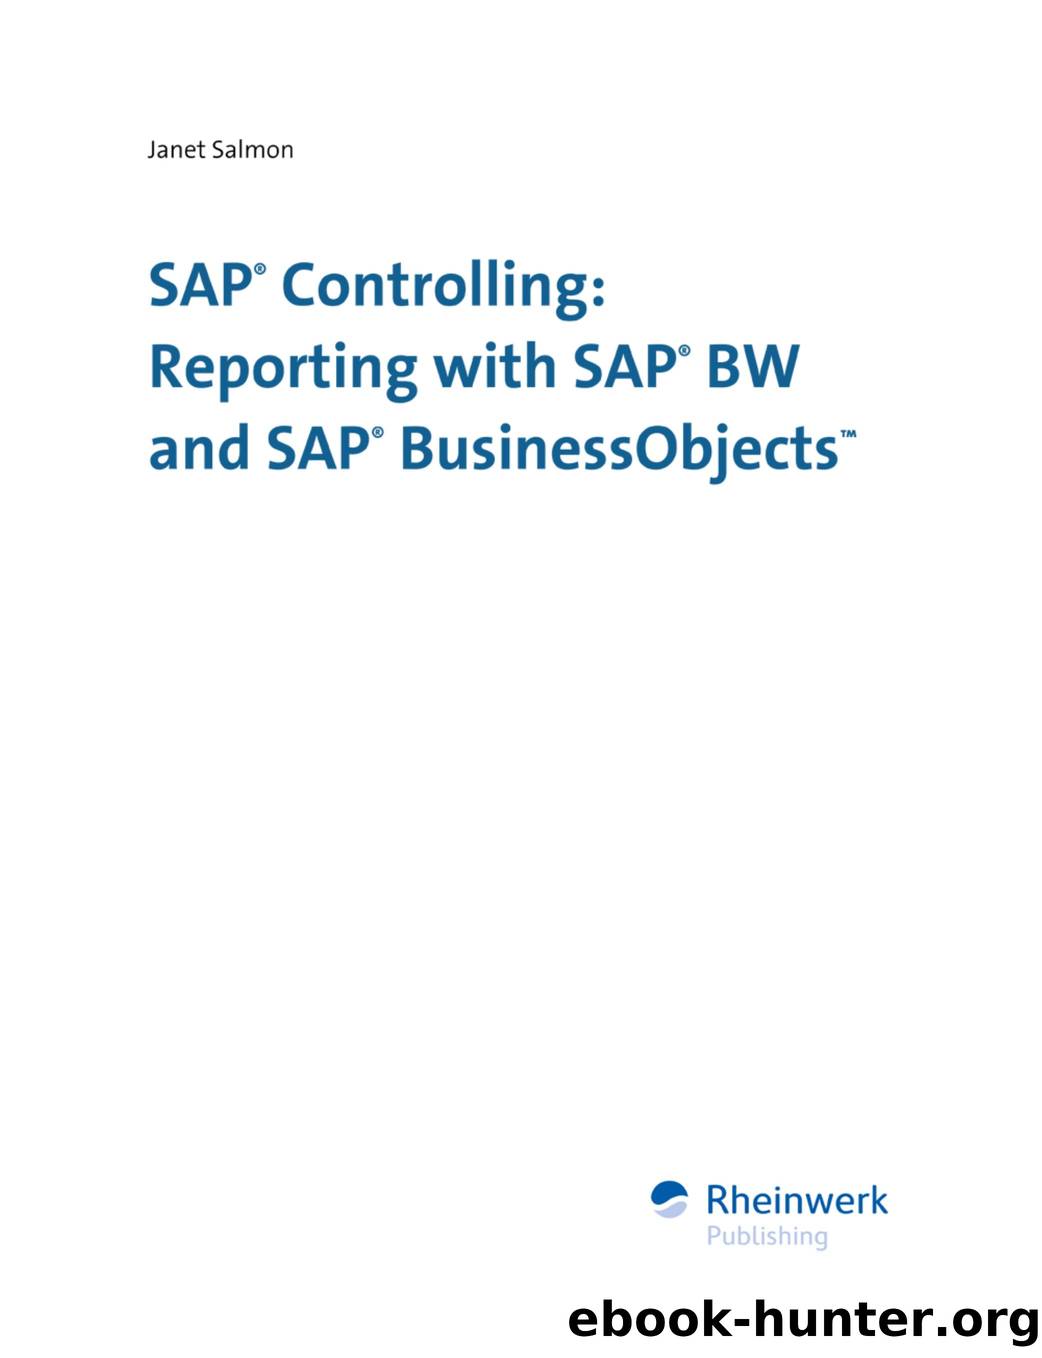 SAP Controlling by Reporting & SAP BW & SAP BusinessObjects